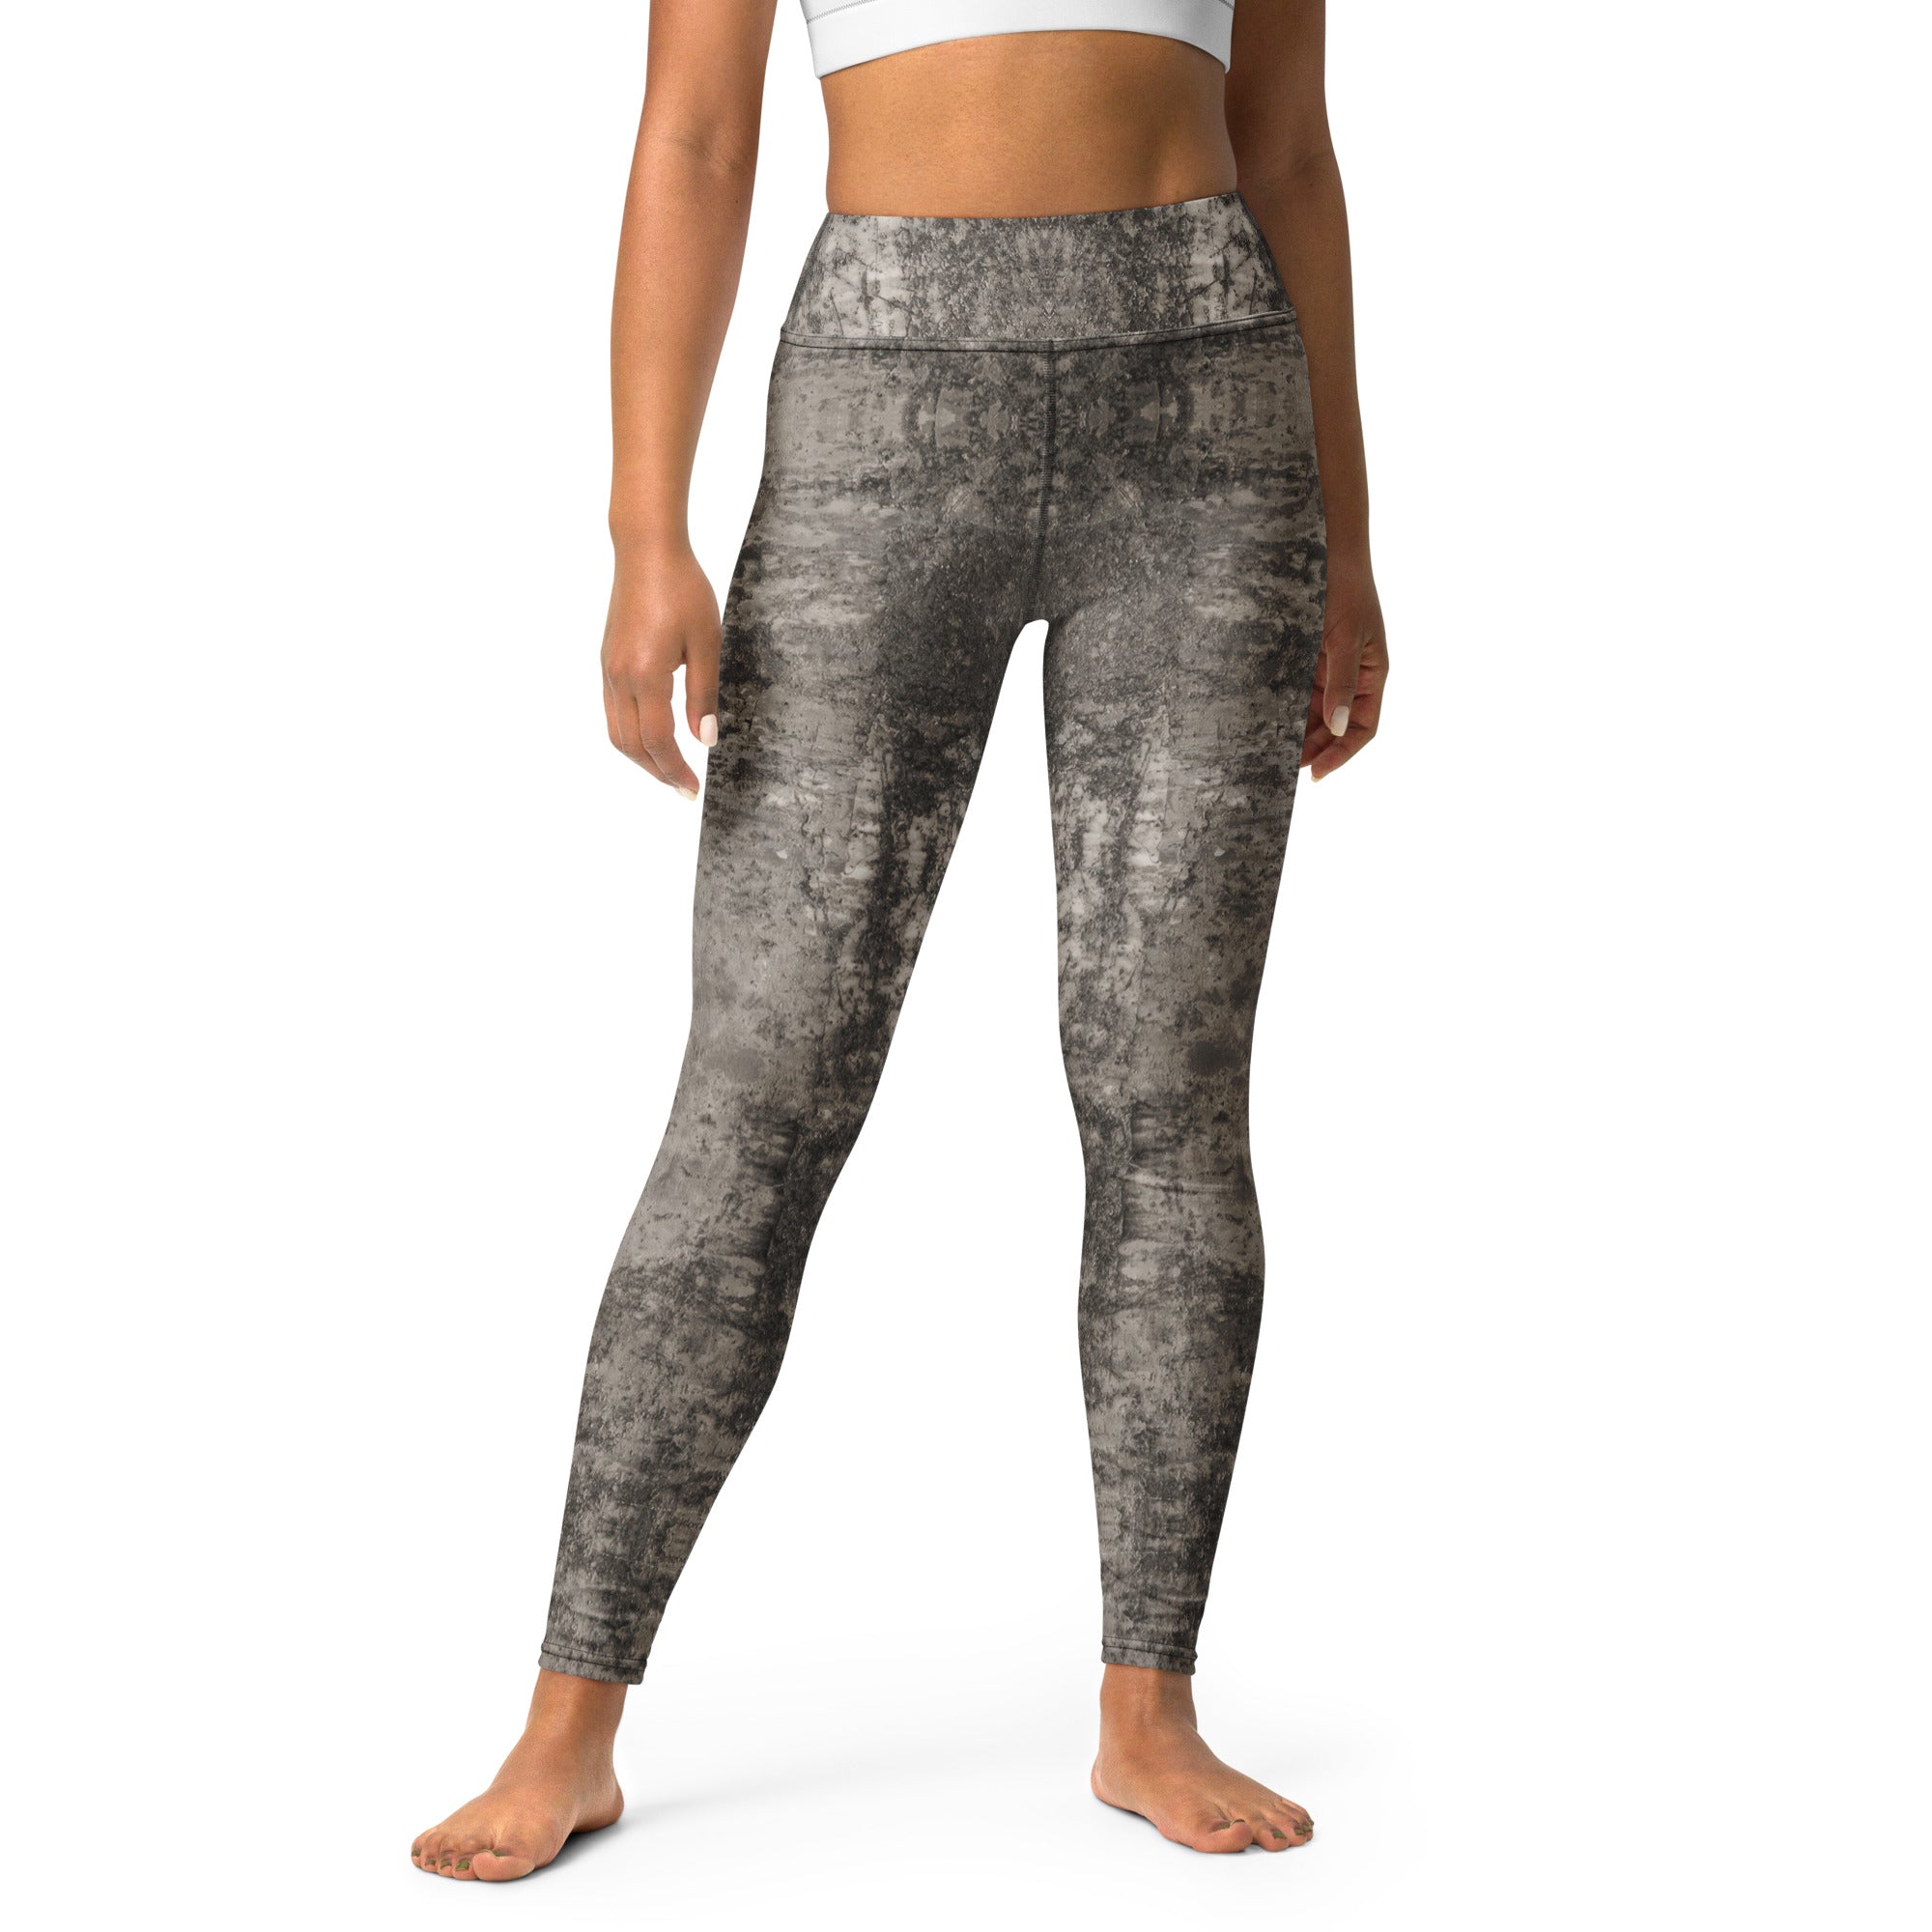 Flexible and Durable Suede Yoga Leggings for Active Wear